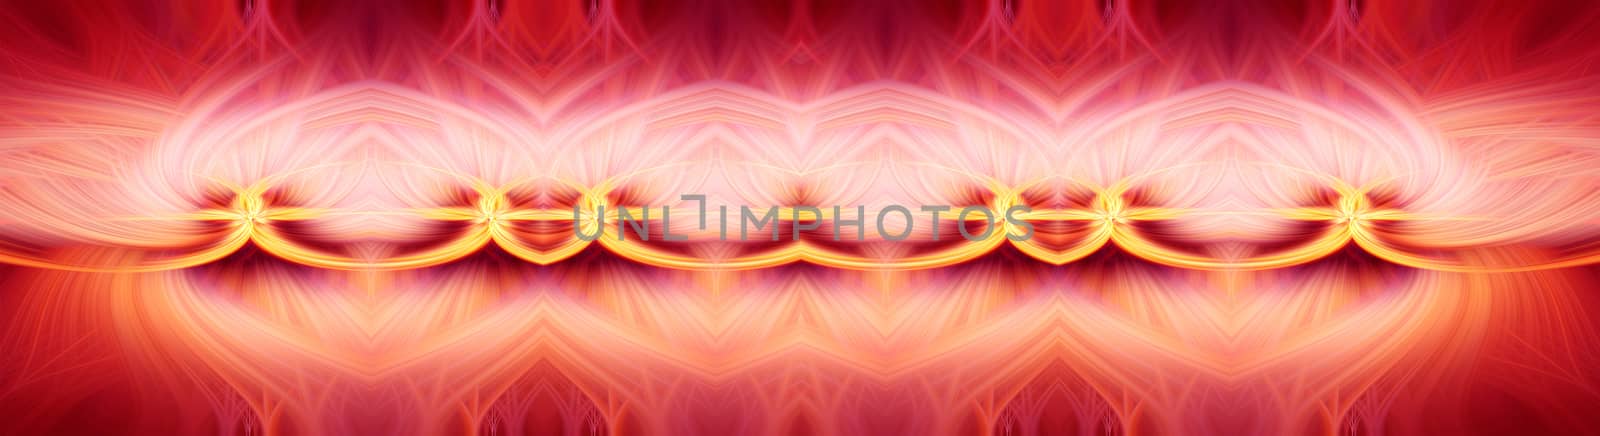 Beautiful abstract intertwined 3d fibers forming an ornament out of various symmetrical shapes. Purple, pink, red, and yellow colors. Illustration. Panorama and banner size.